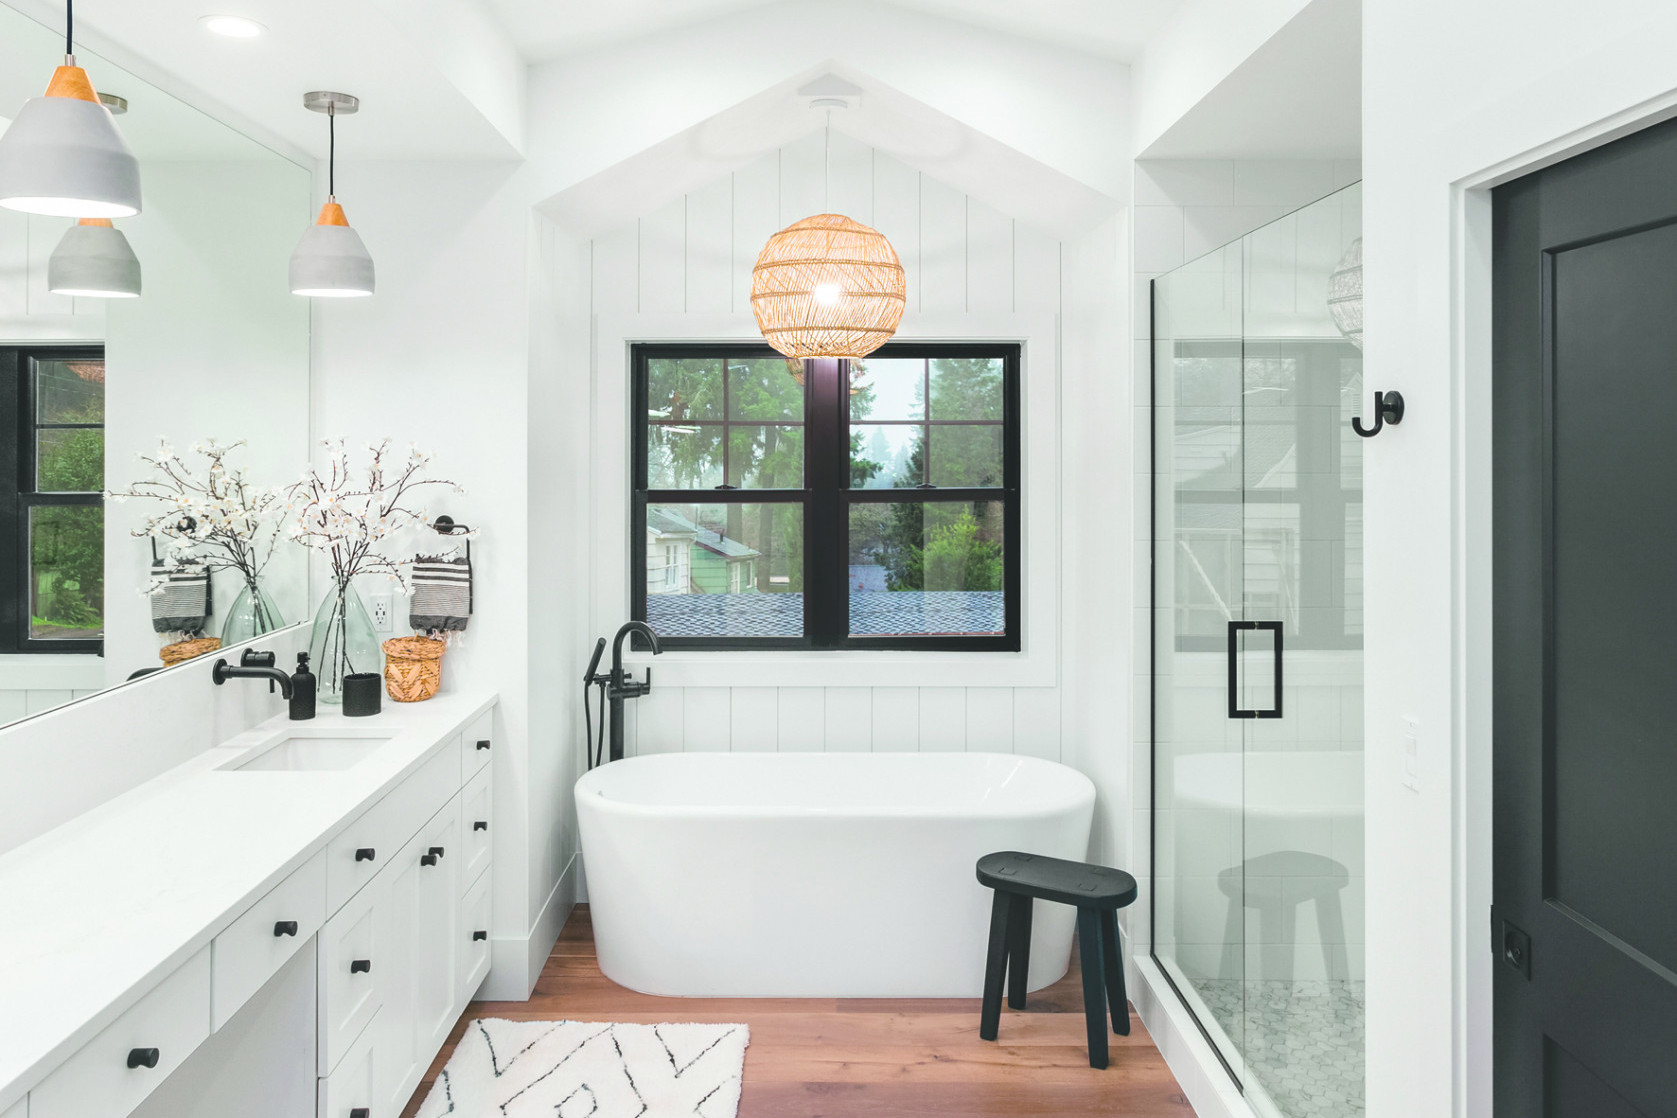 Creating a feeling of light and space in your bathroom - feature photo